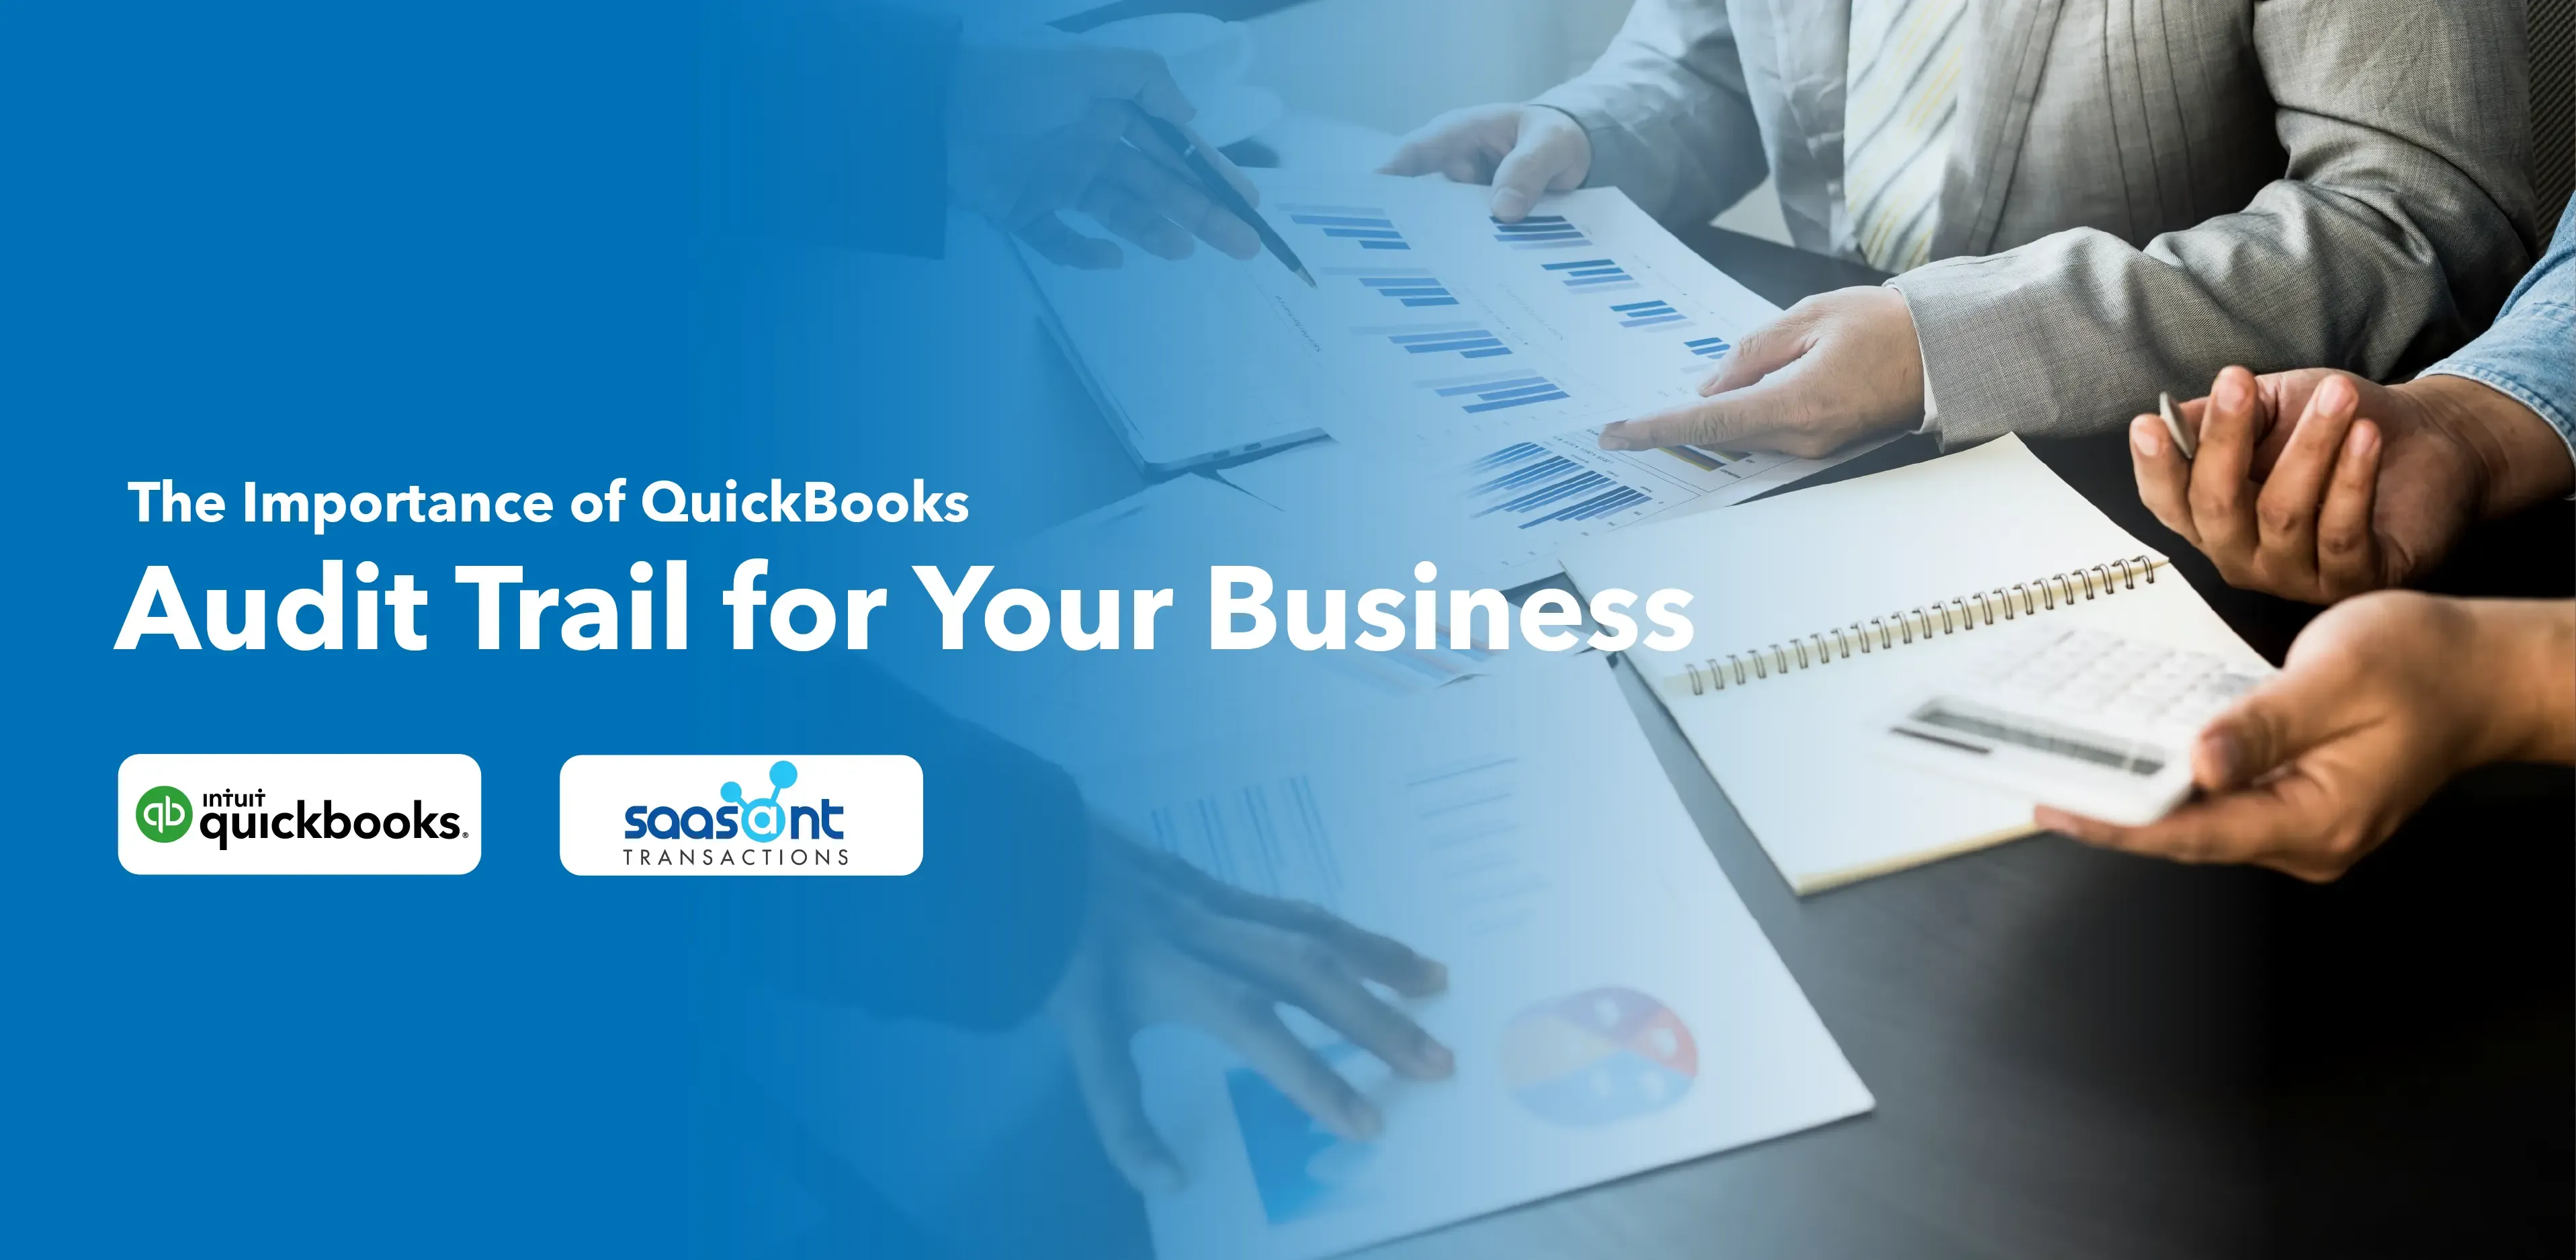 The Importance of QuickBooks Audit Trail